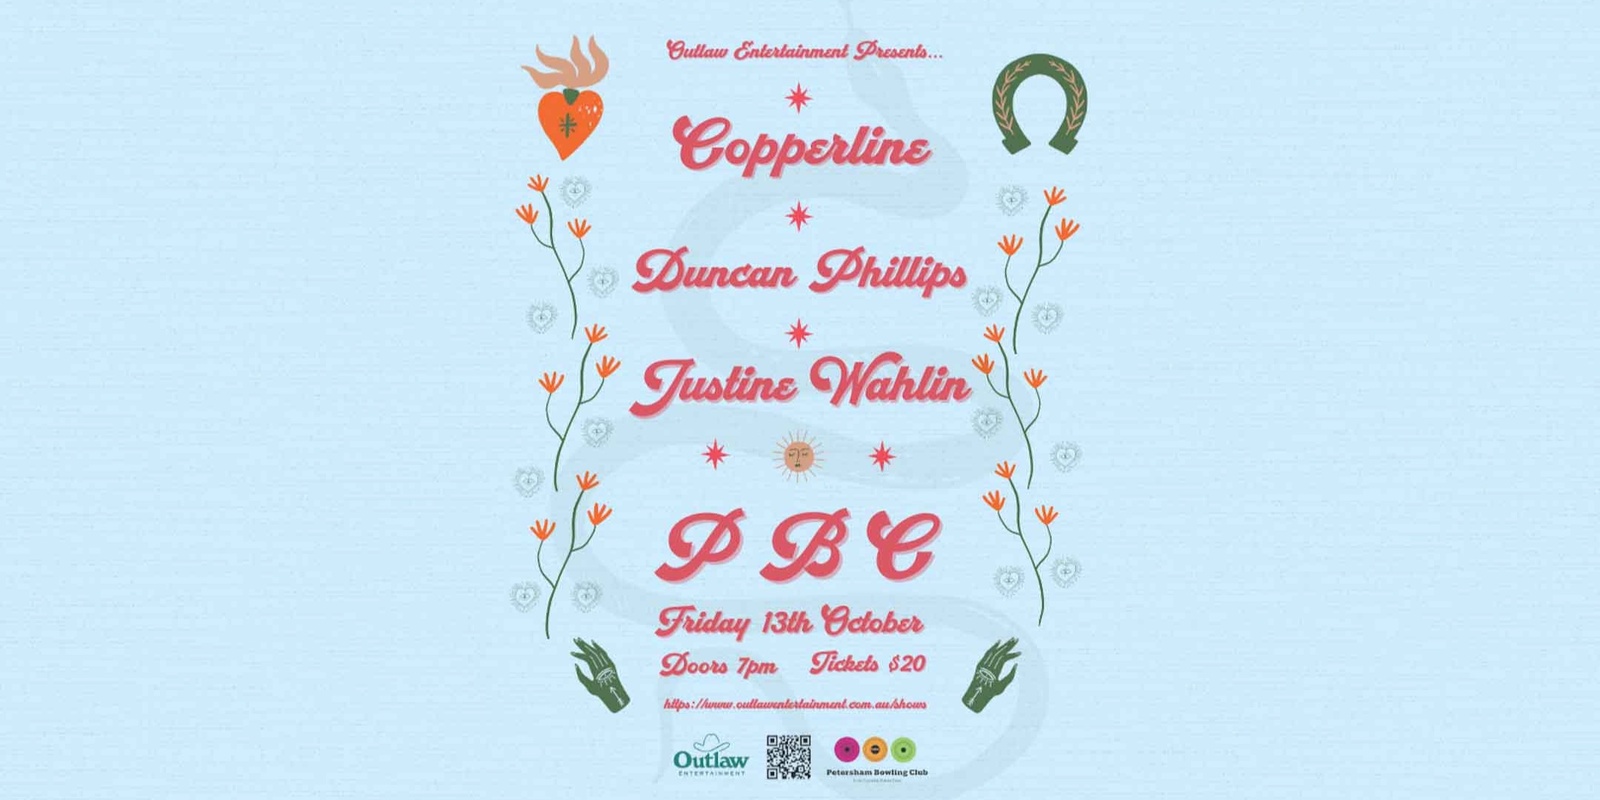 Banner image for Copperline, Duncan Phillips and Justine Wahlin